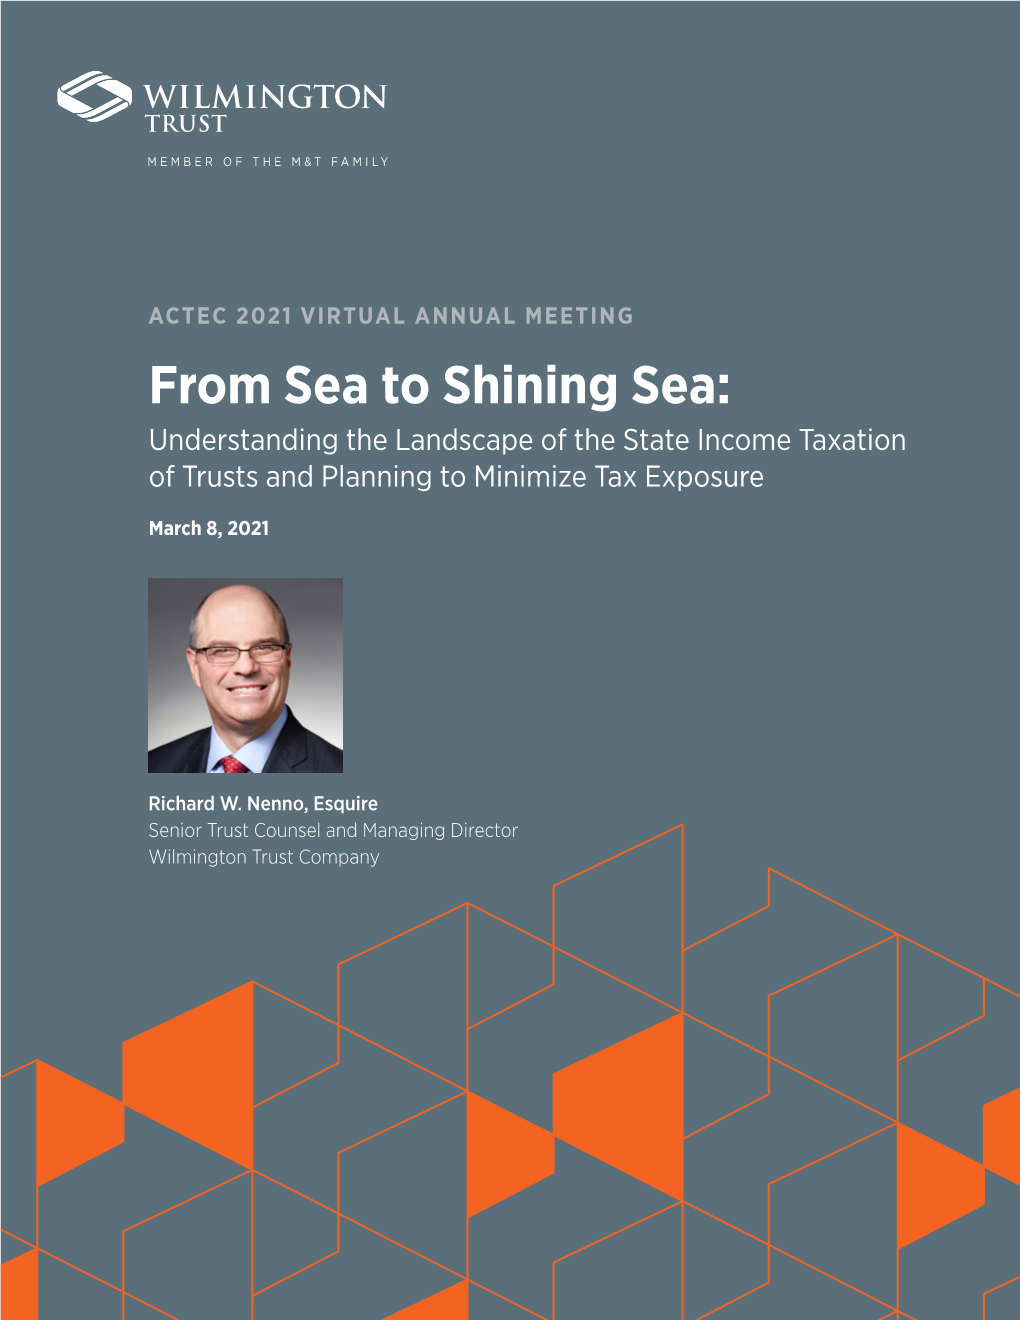 From Sea to Shining Sea: Understanding the Landscape of the State Income Taxation of Trusts and Planning to Minimize Tax Exposure